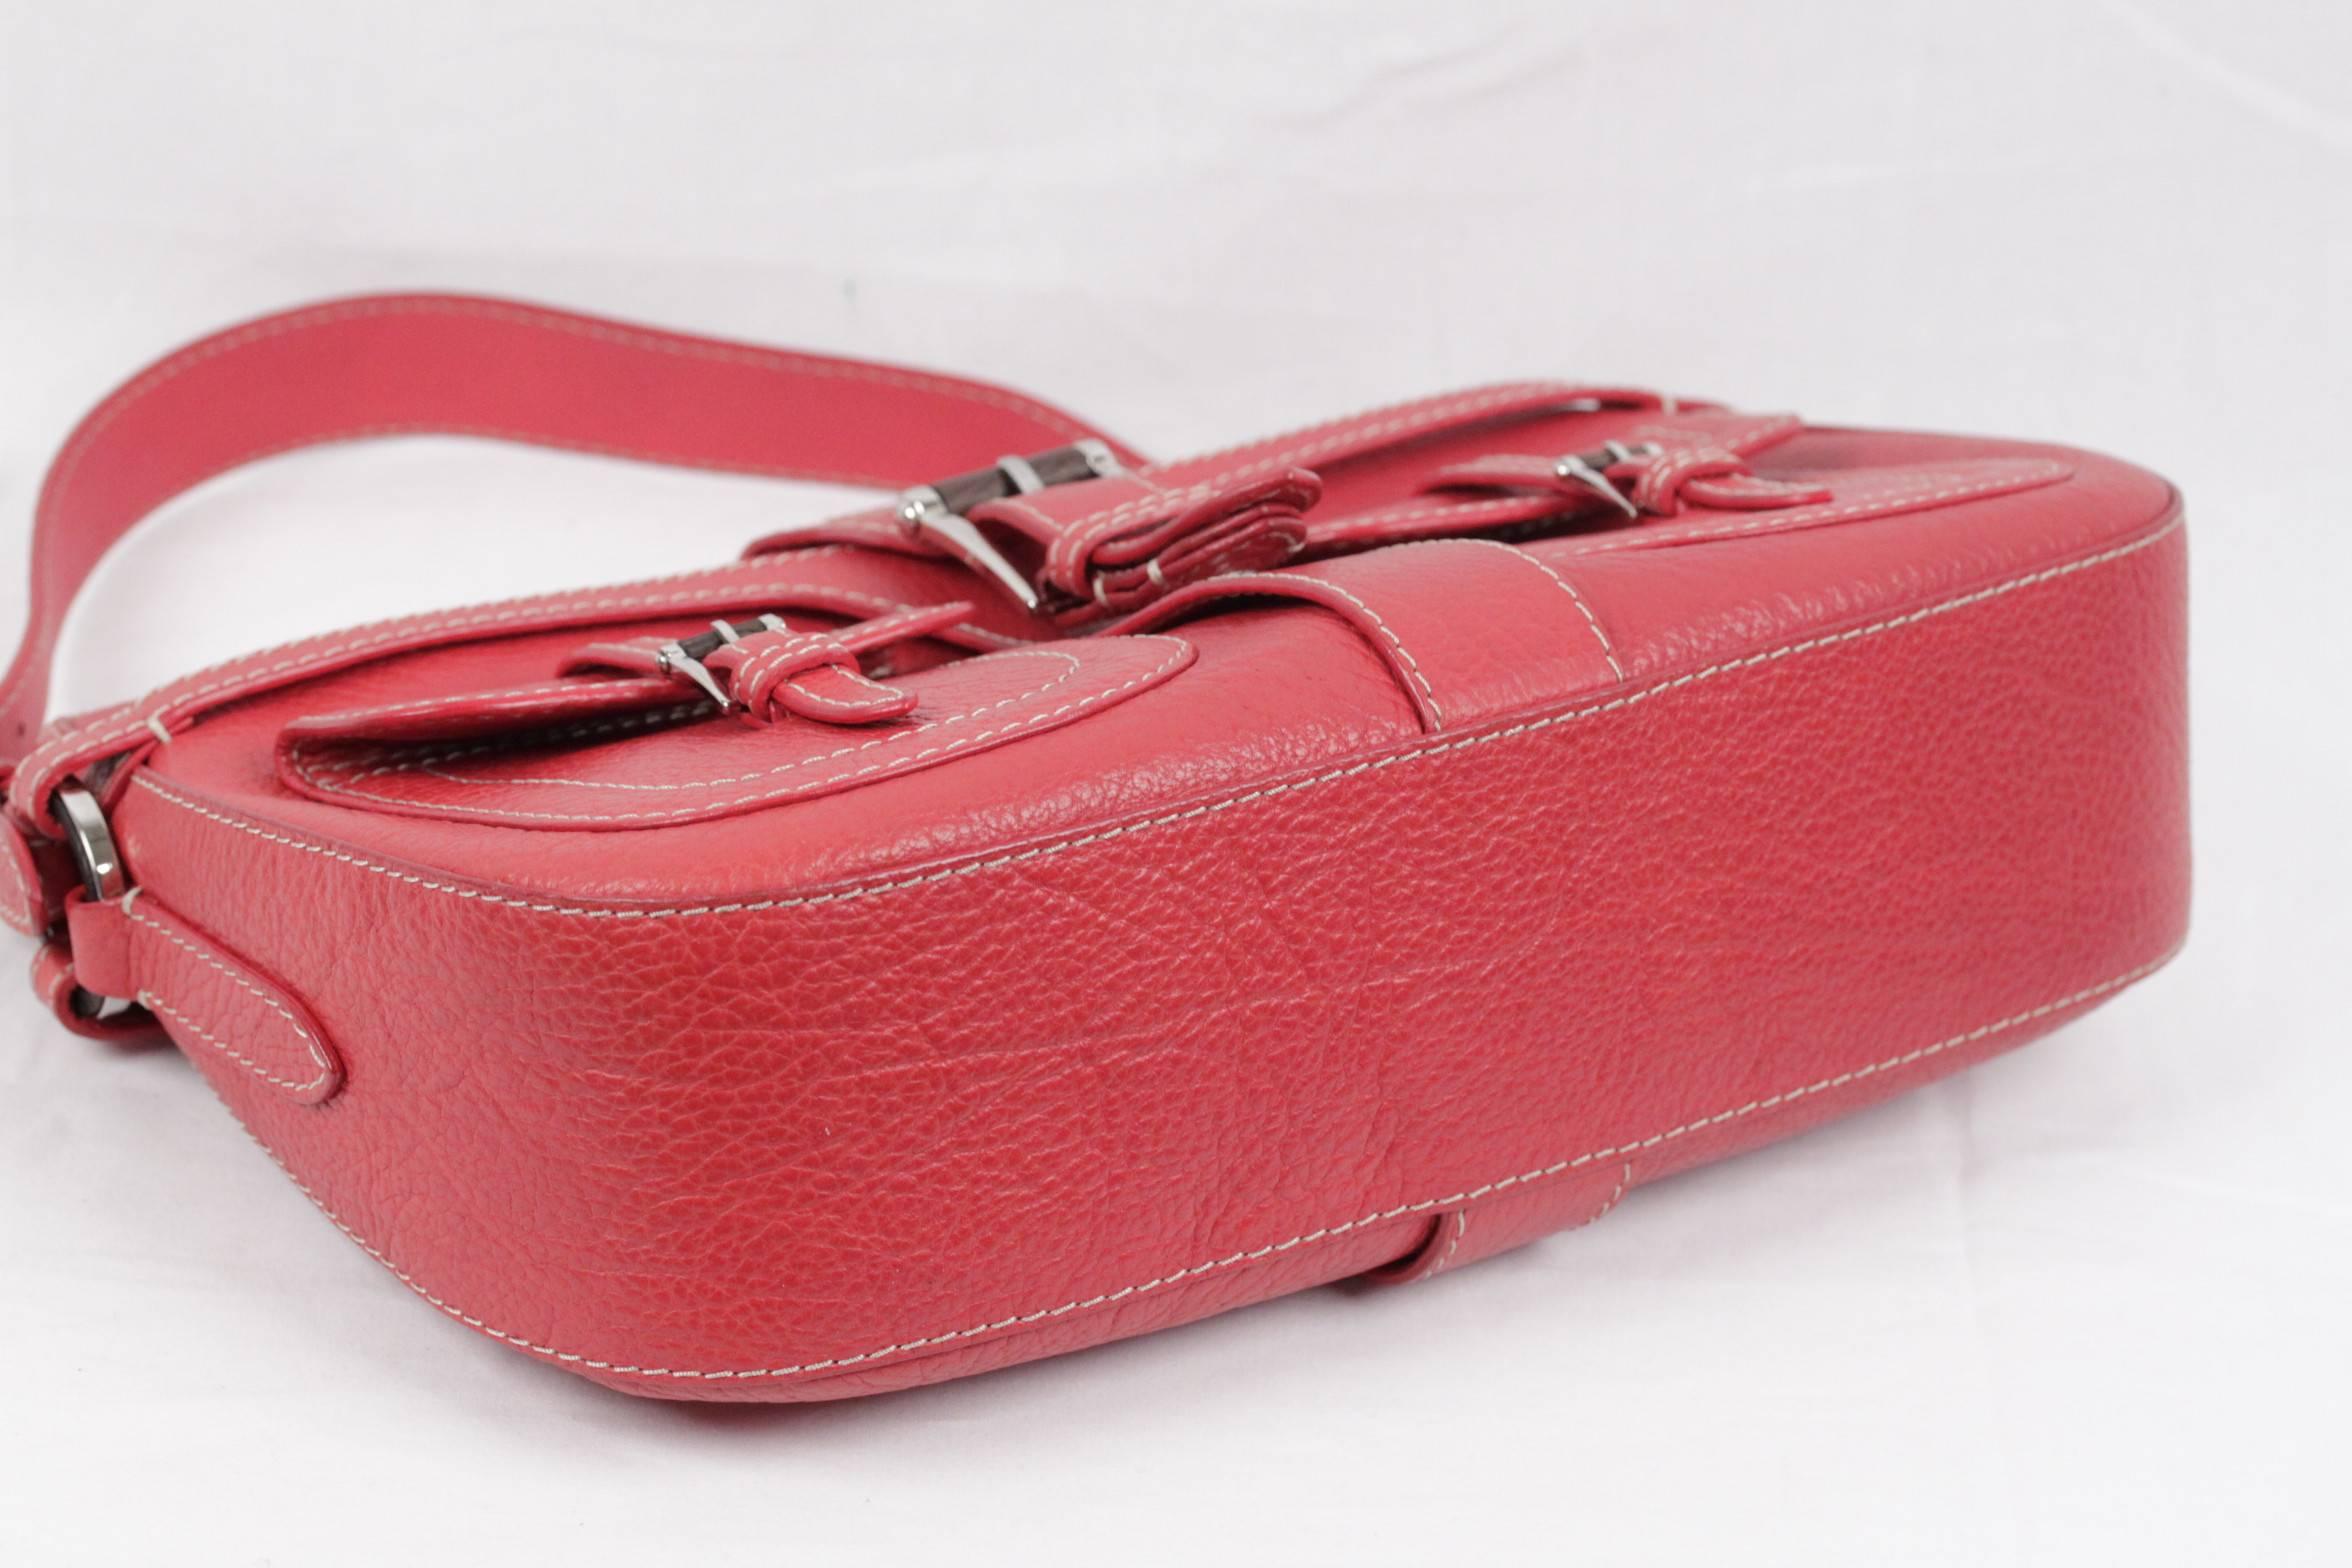 VALENTINO GARAVANI Red Leather SHOULDER BAG Handbag w/ FRONT POCKETS In Excellent Condition In Rome, Rome